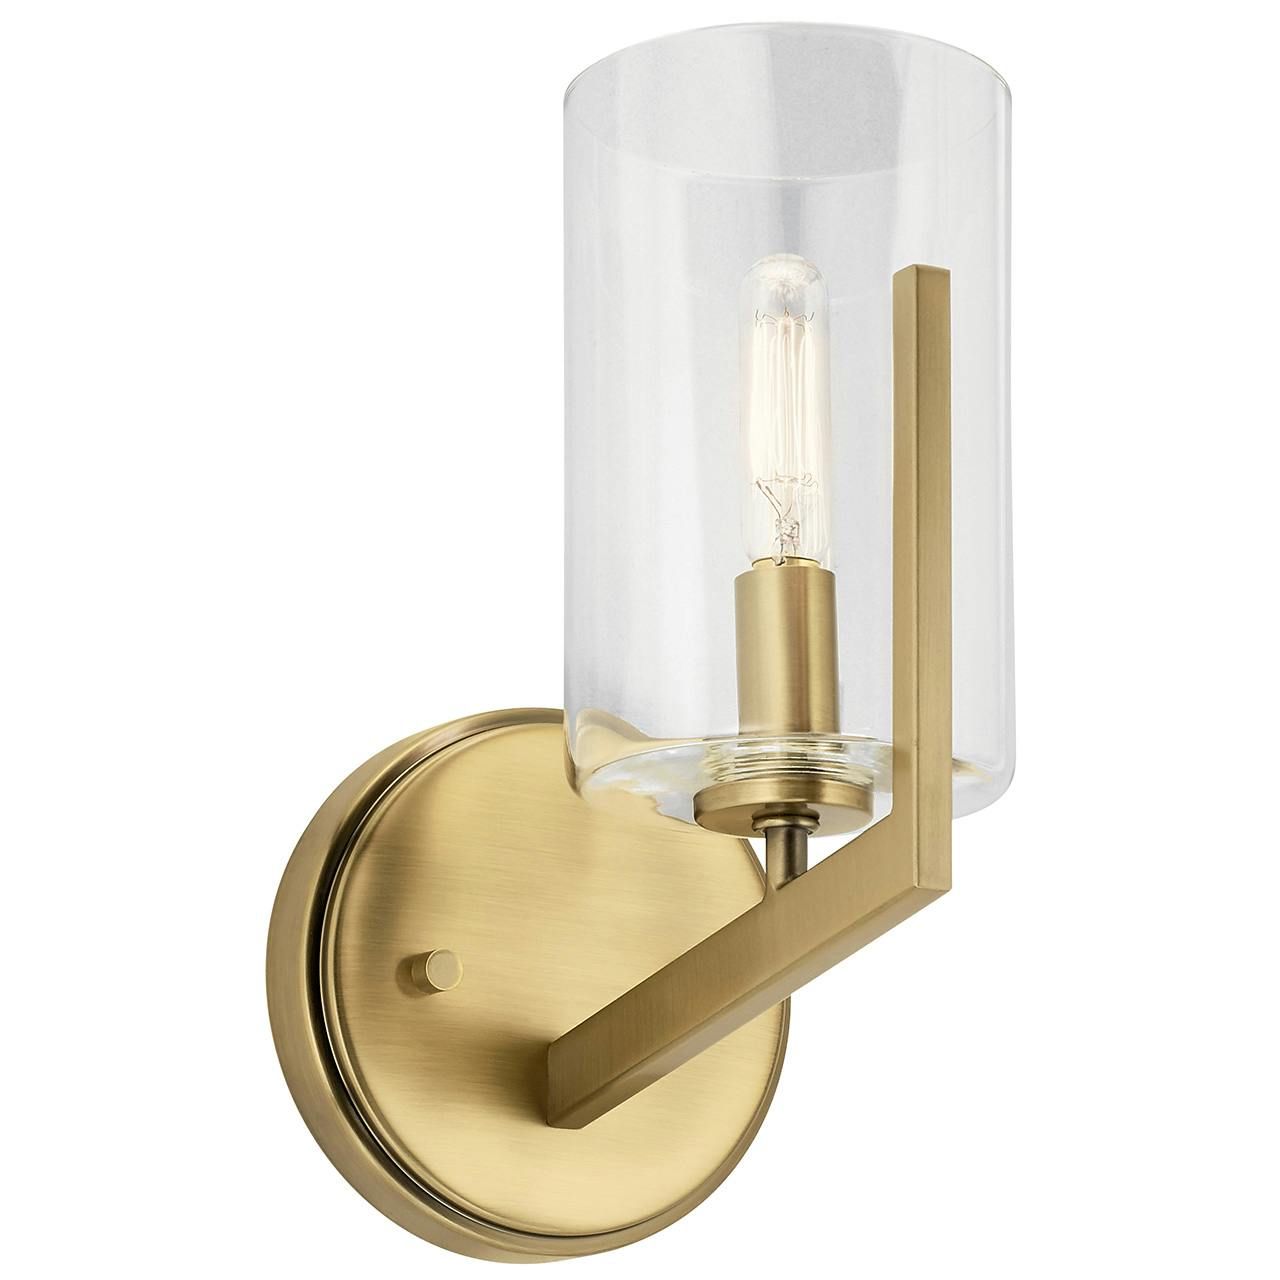 Nye 9.75" 1 Light Sconce in Brass on a white background